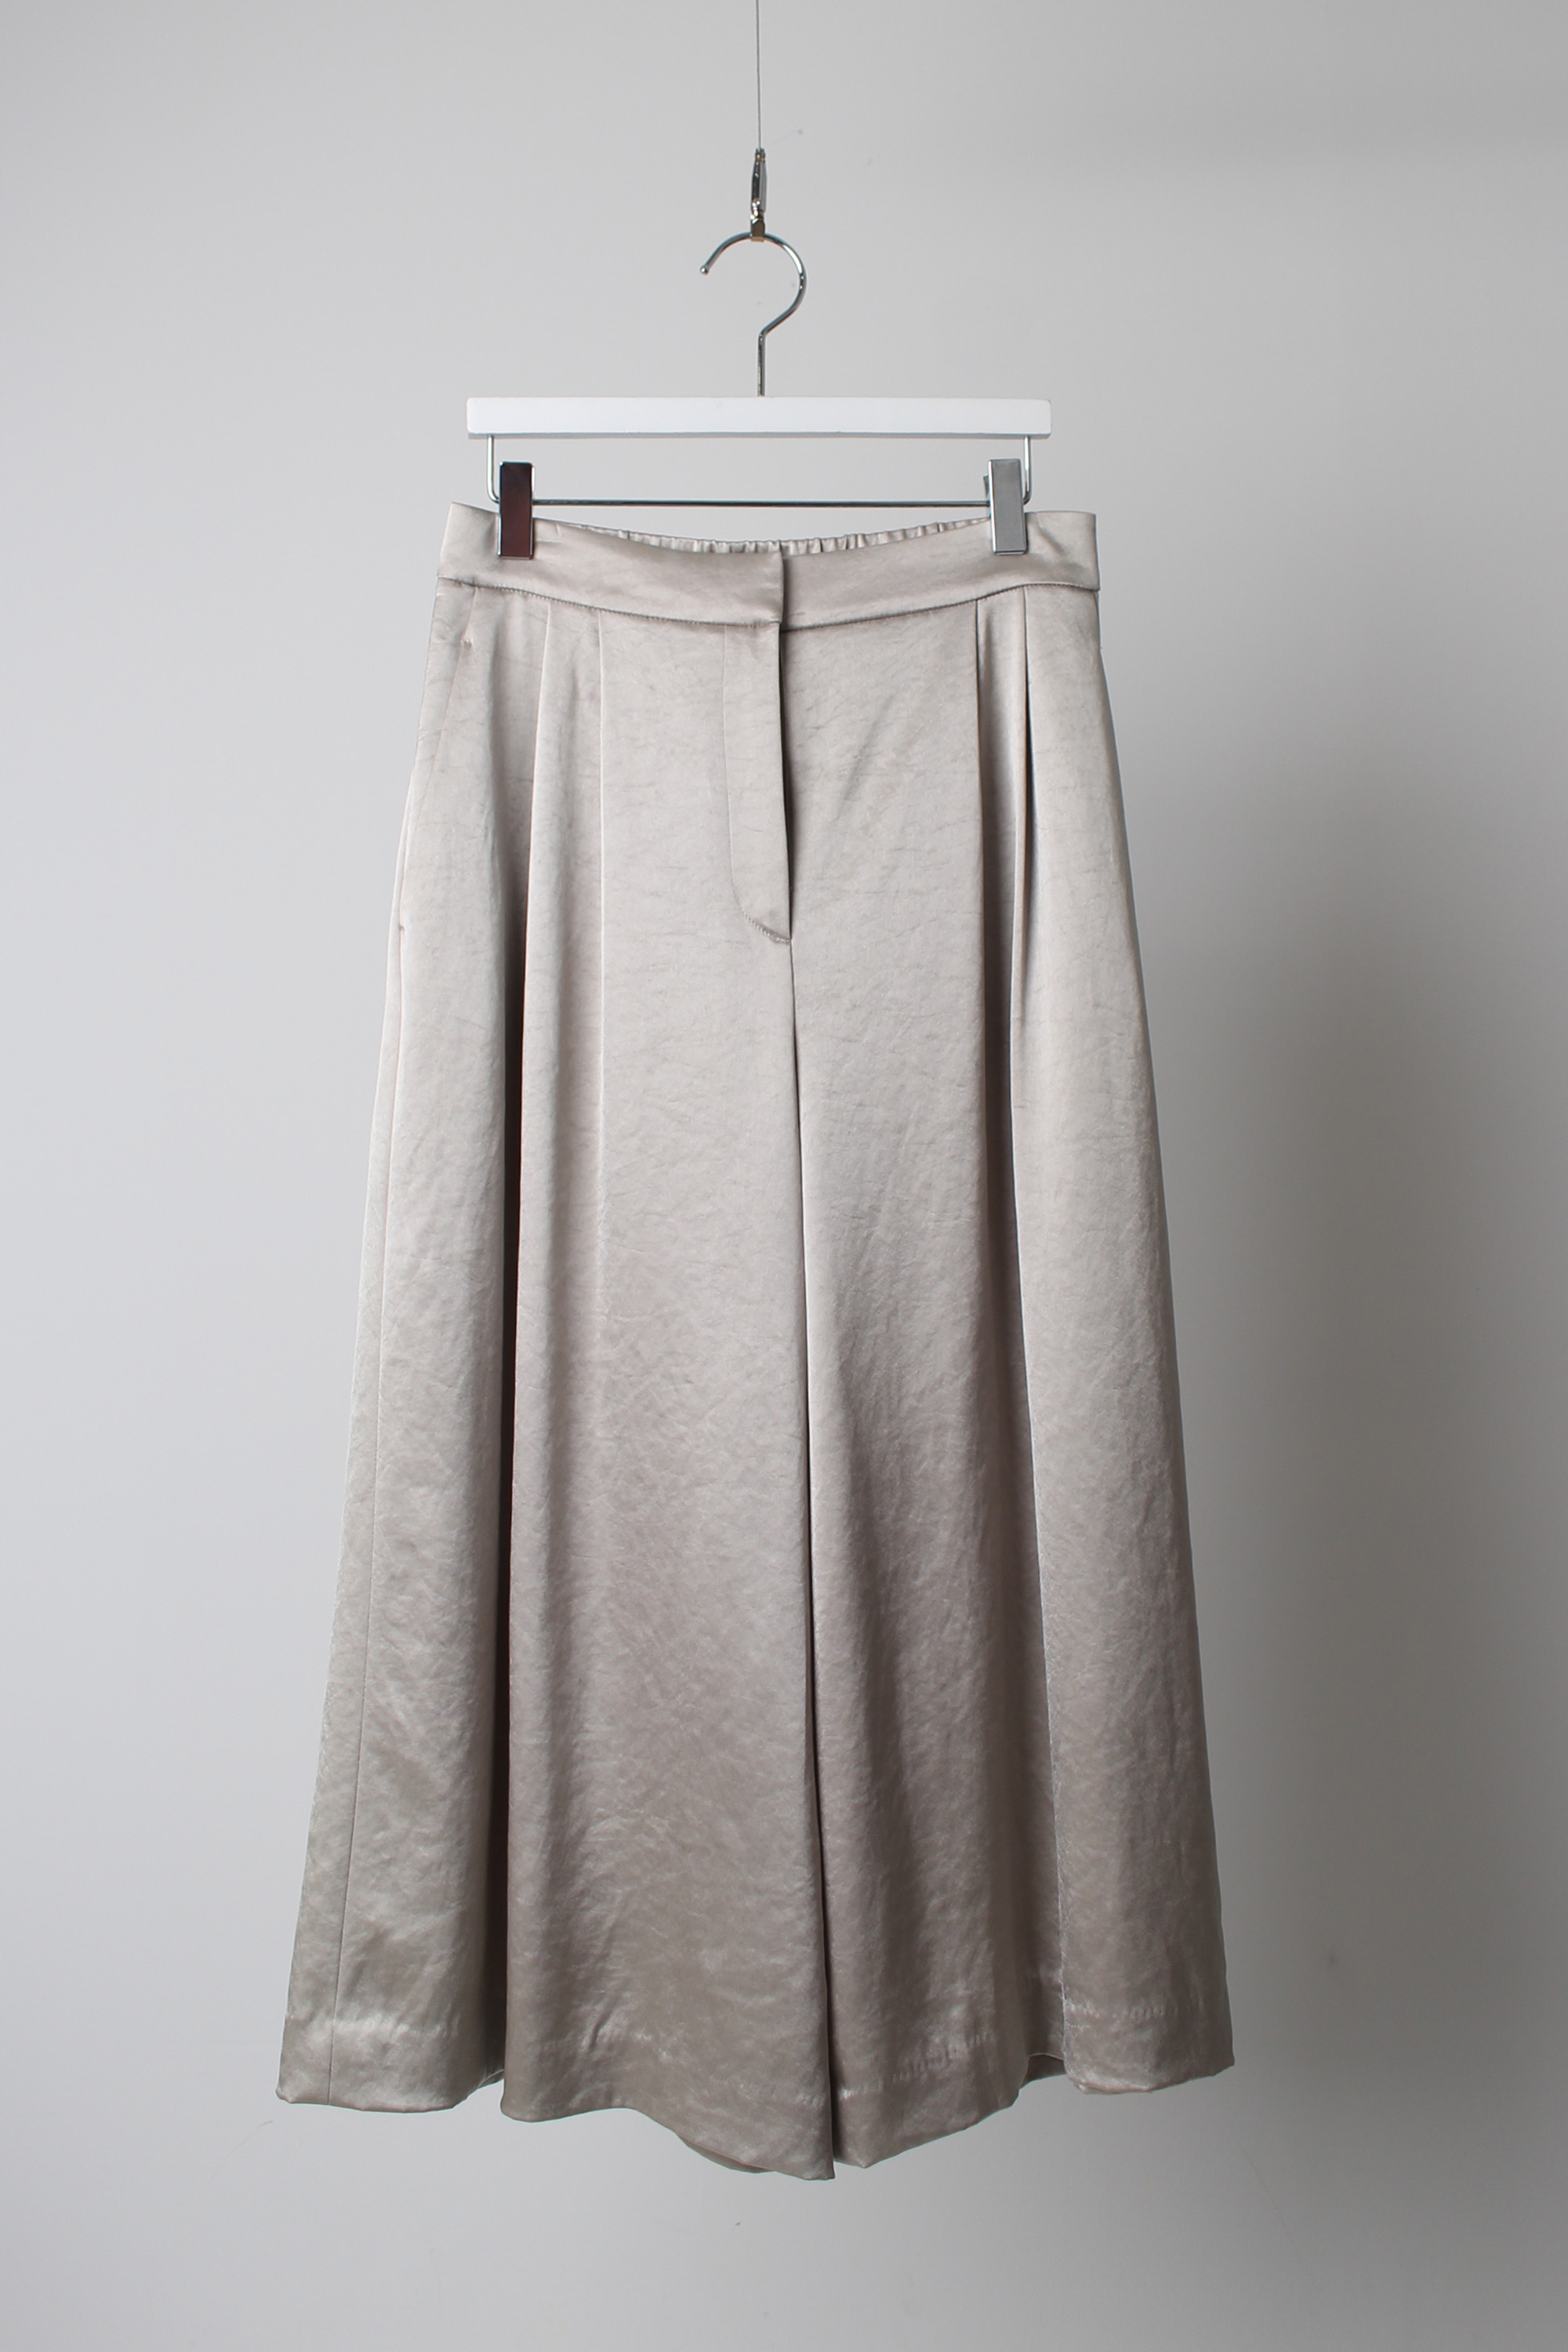 Theory luxe satin pants